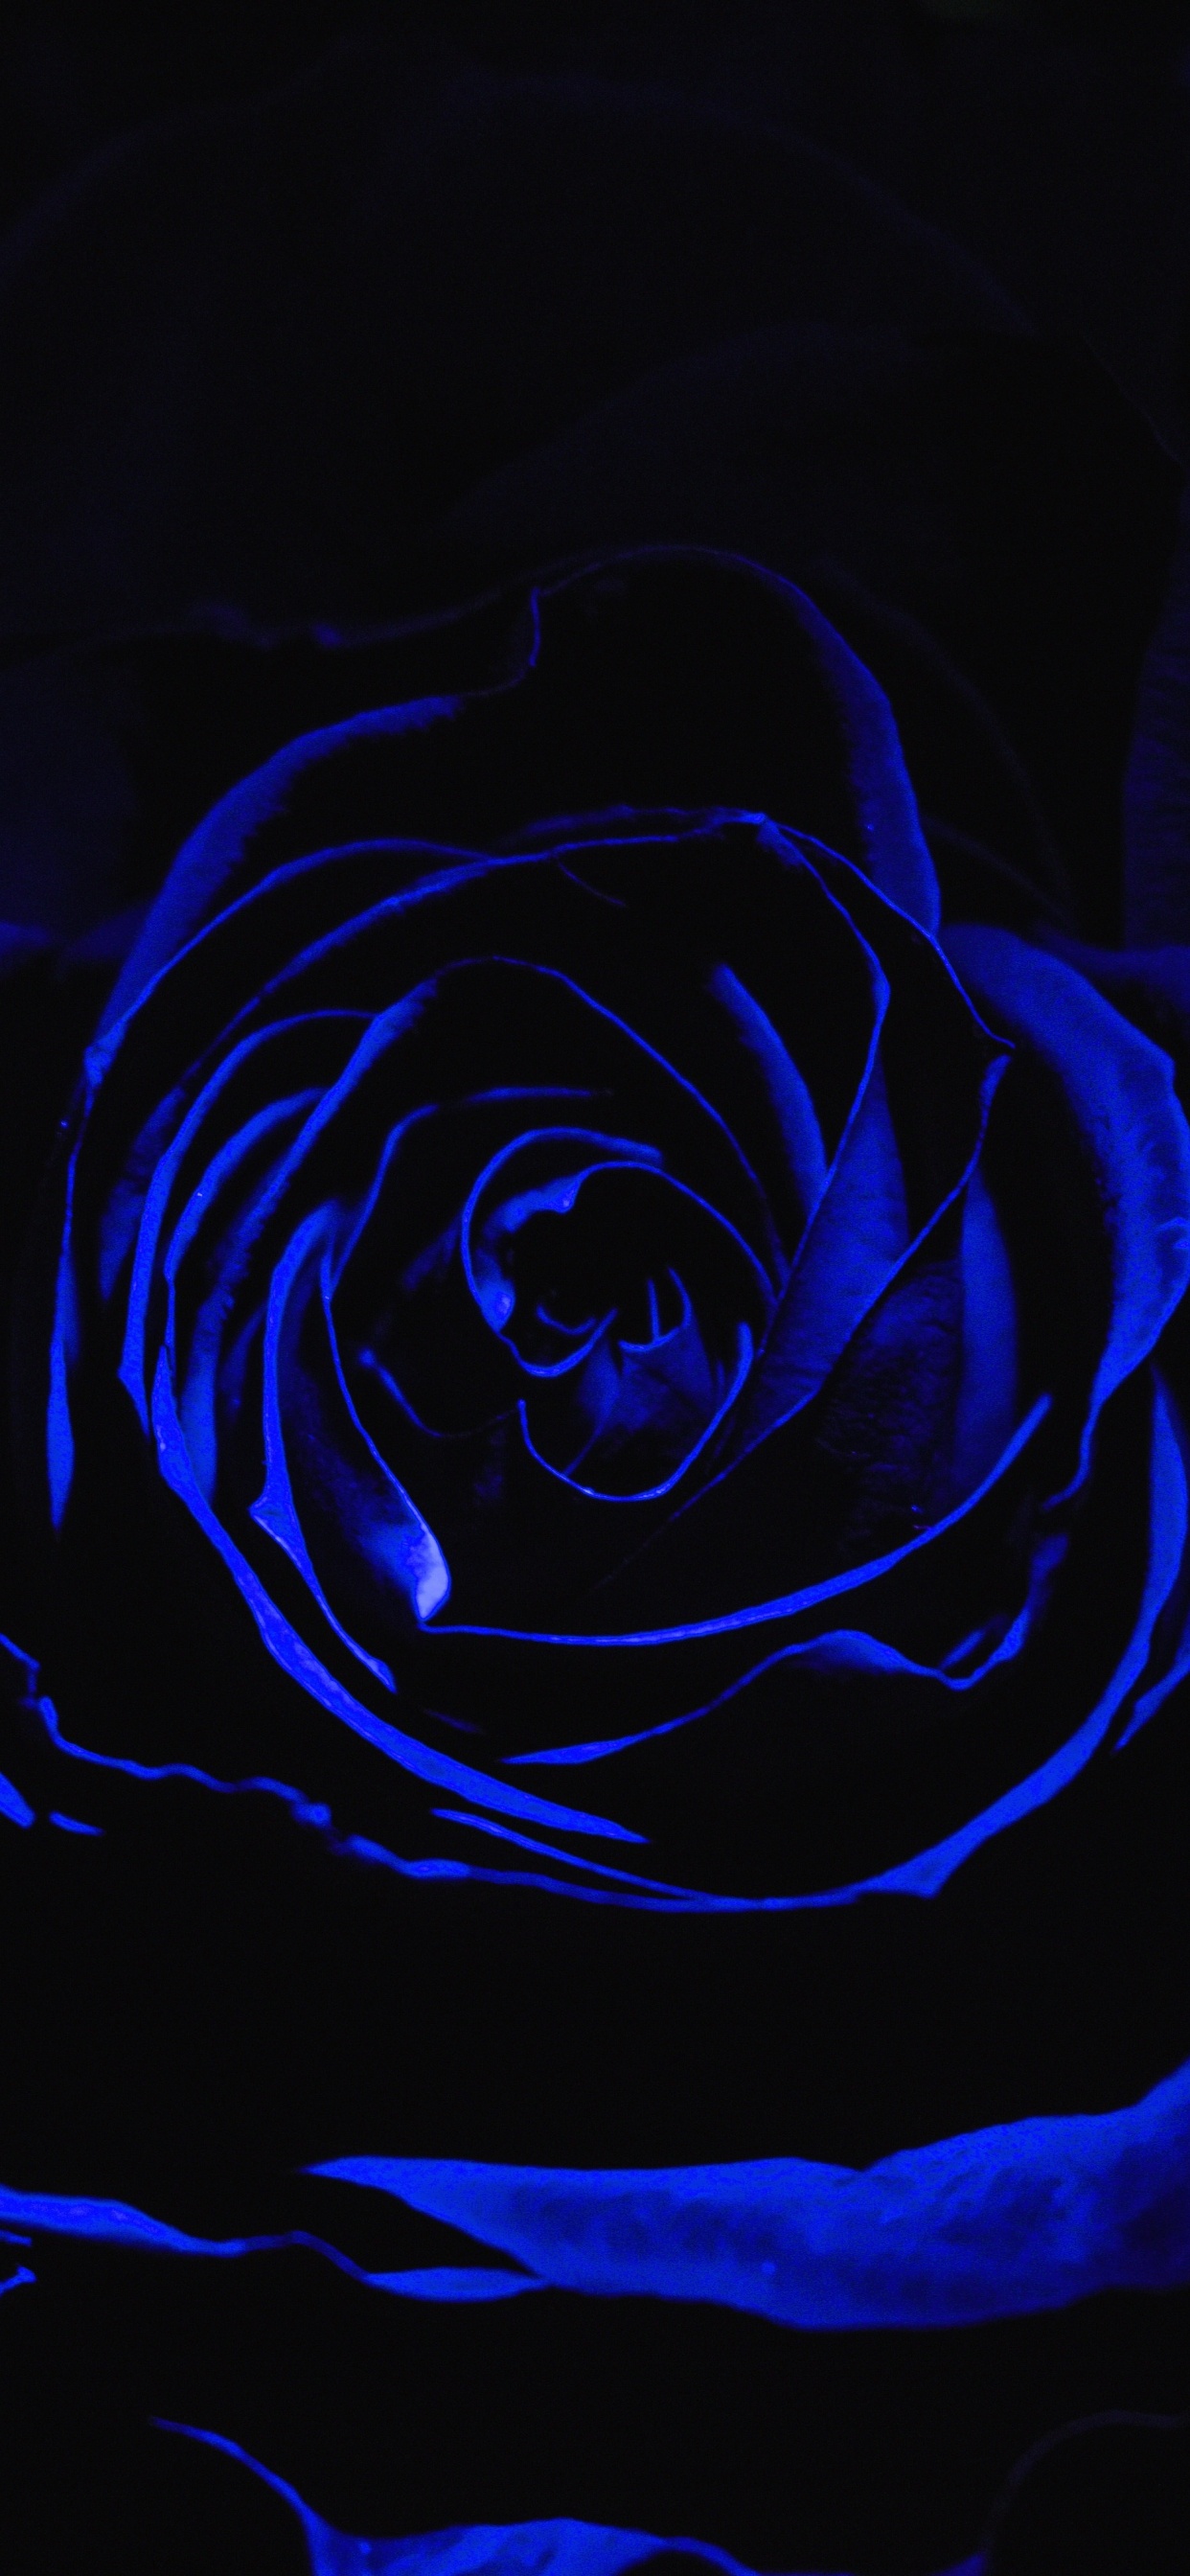 Blue Rose in Close up Photography. Wallpaper in 1242x2688 Resolution